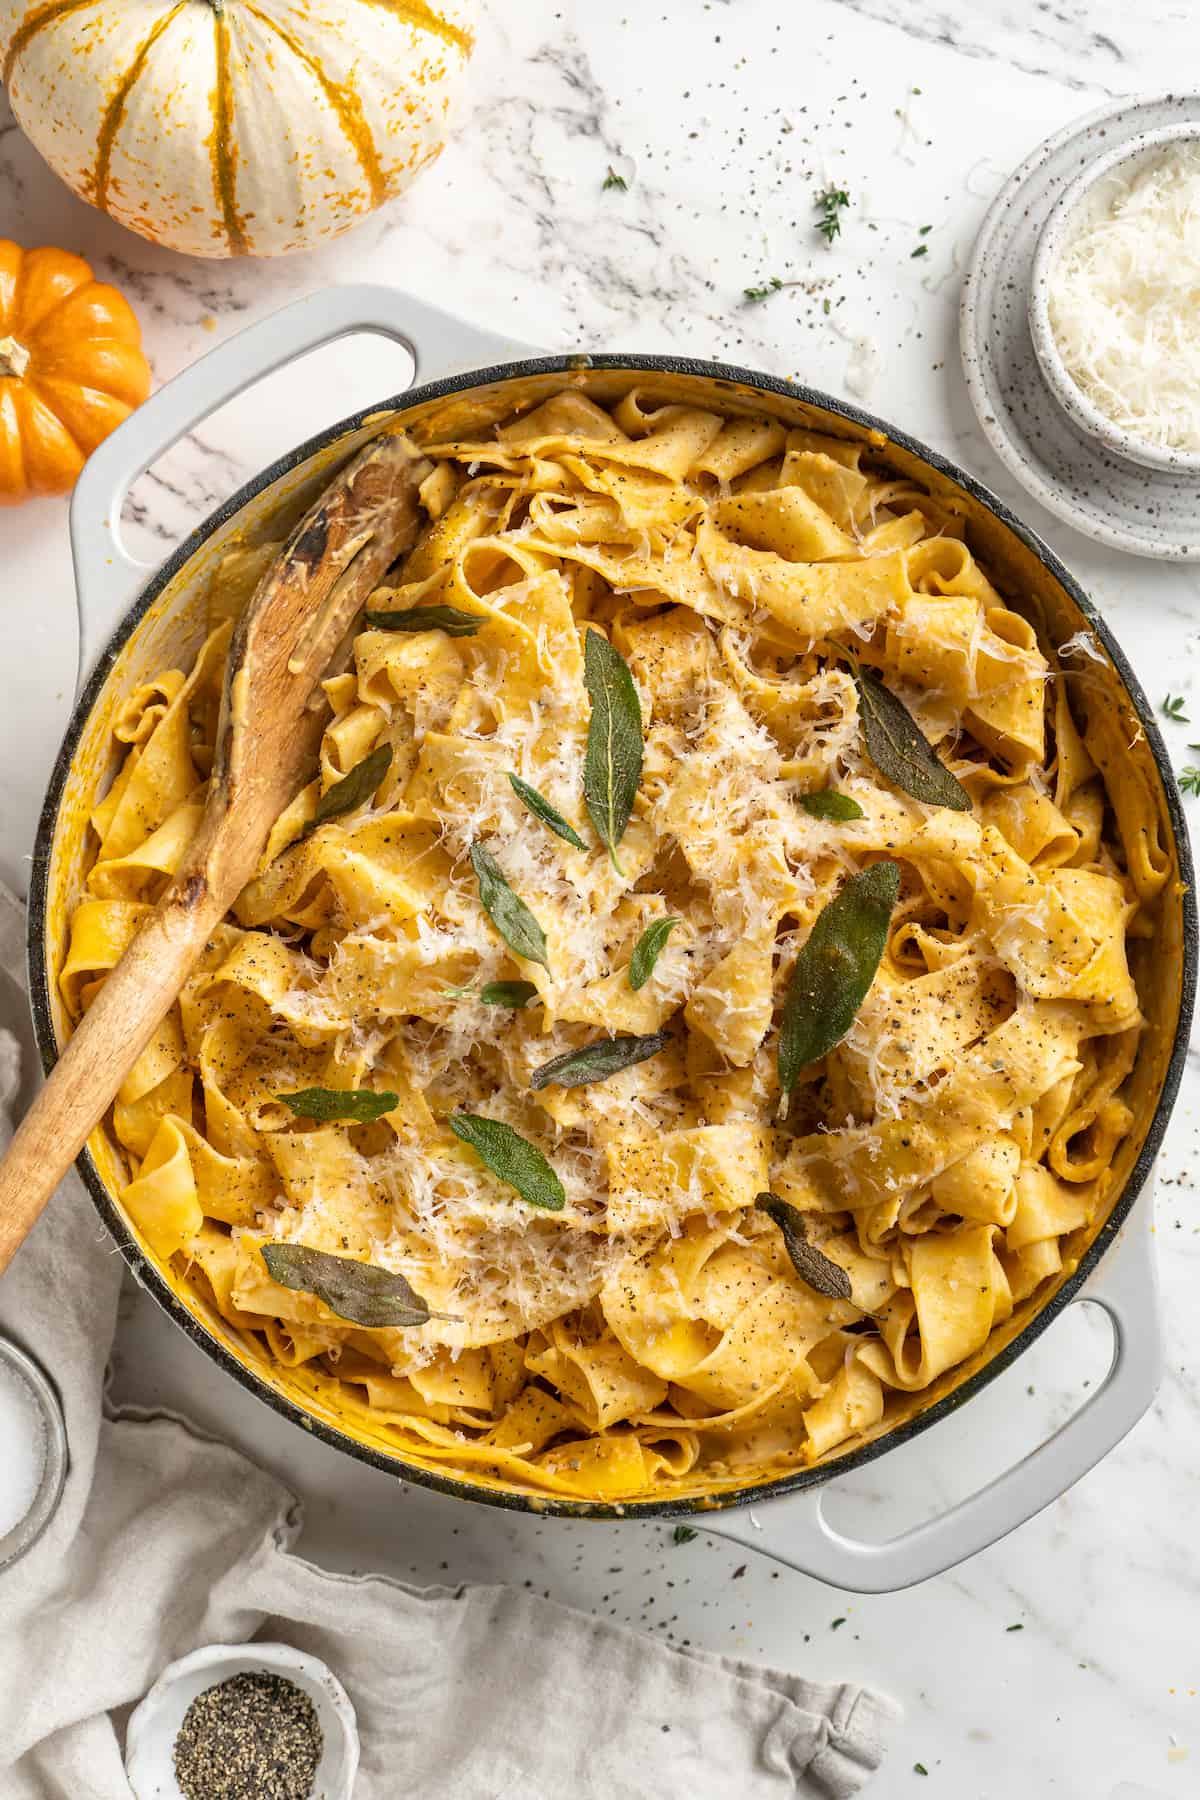 Overhead view of pumpkin alfredo pasta in skillet garnished with sage leaves and parmesan